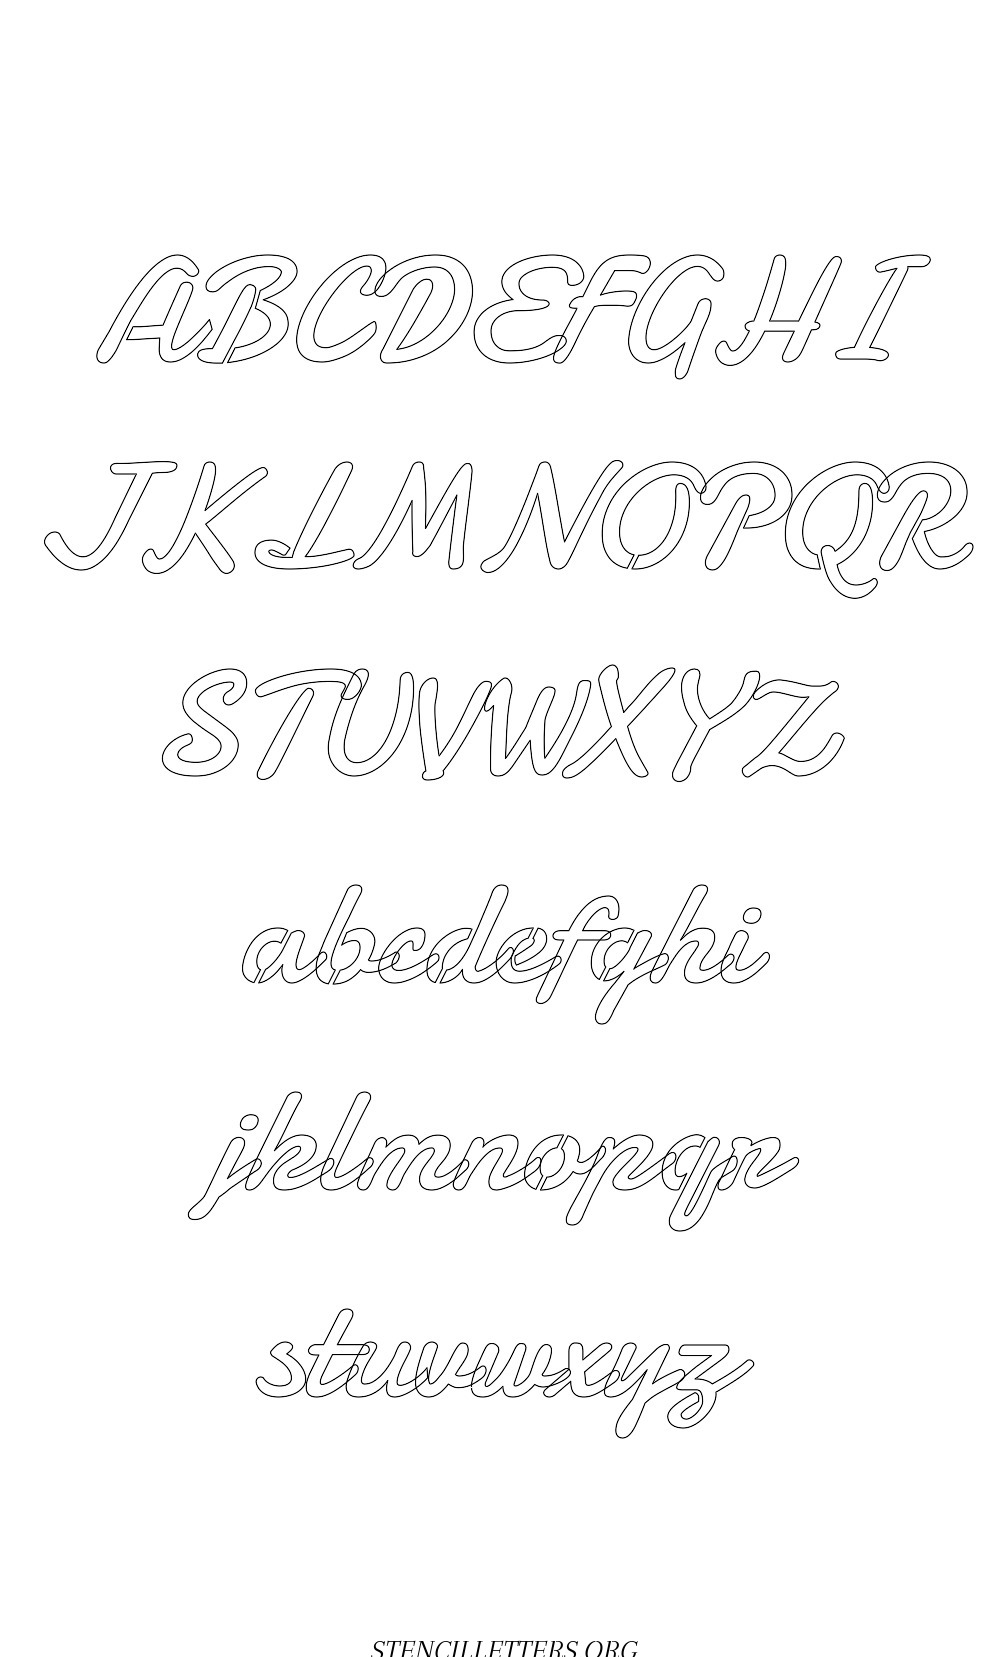 Display Script Cursive Free Printable Letter Stencils with Outline ...